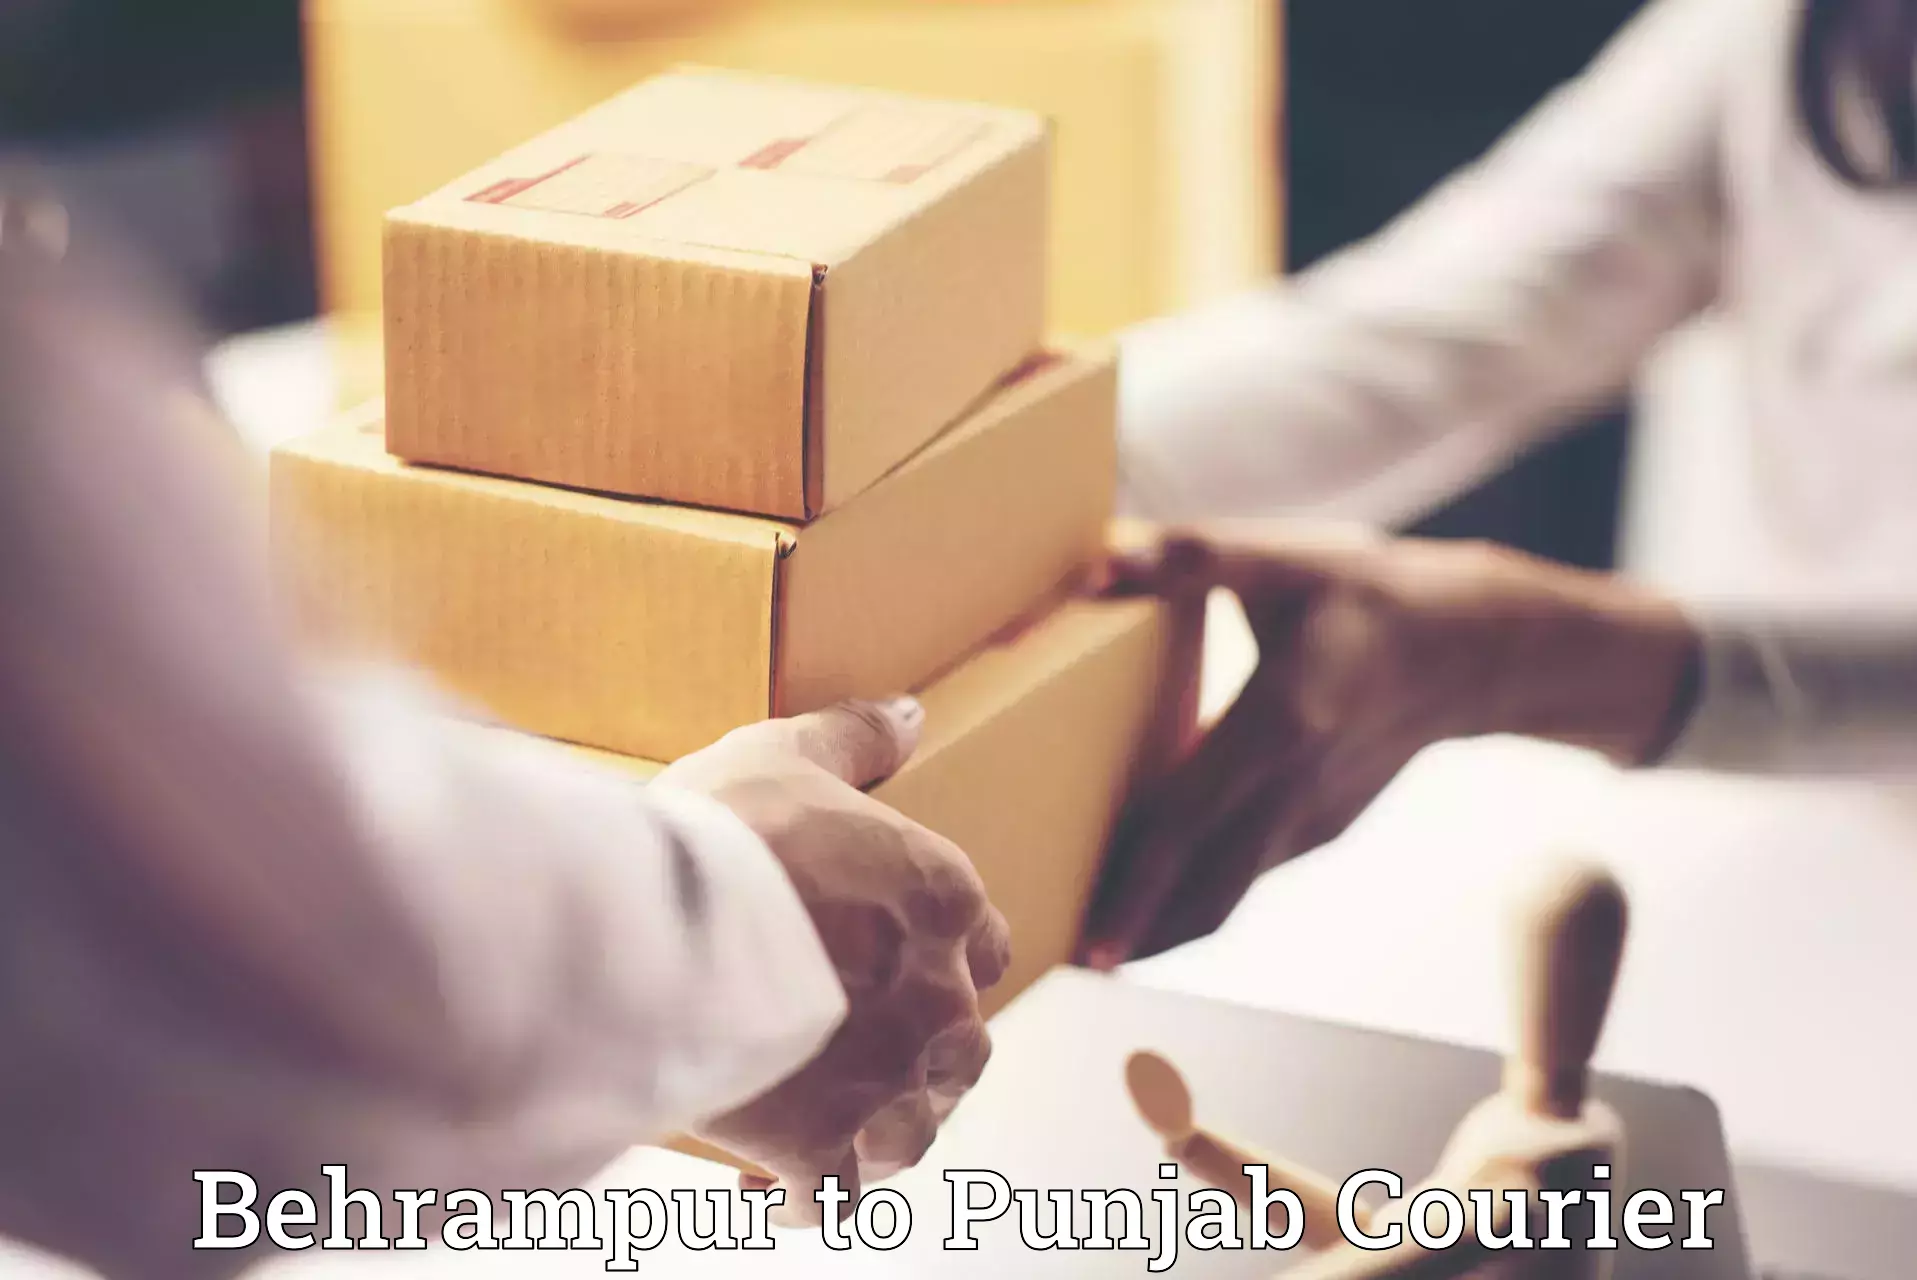 Professional moving strategies Behrampur to Pathankot